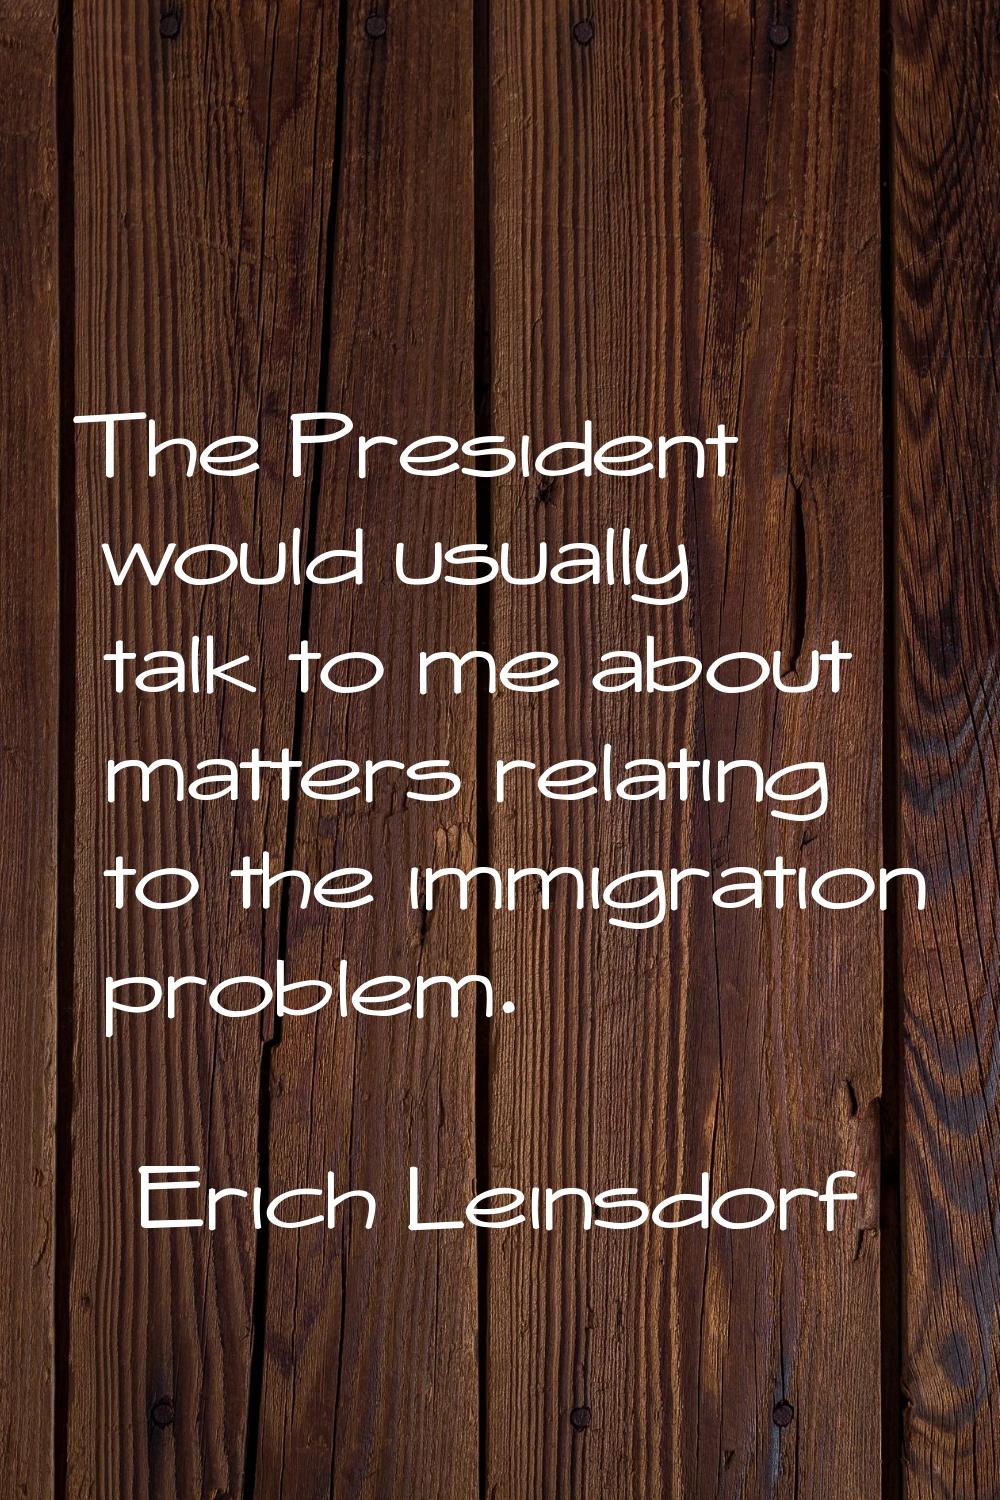 The President would usually talk to me about matters relating to the immigration problem.